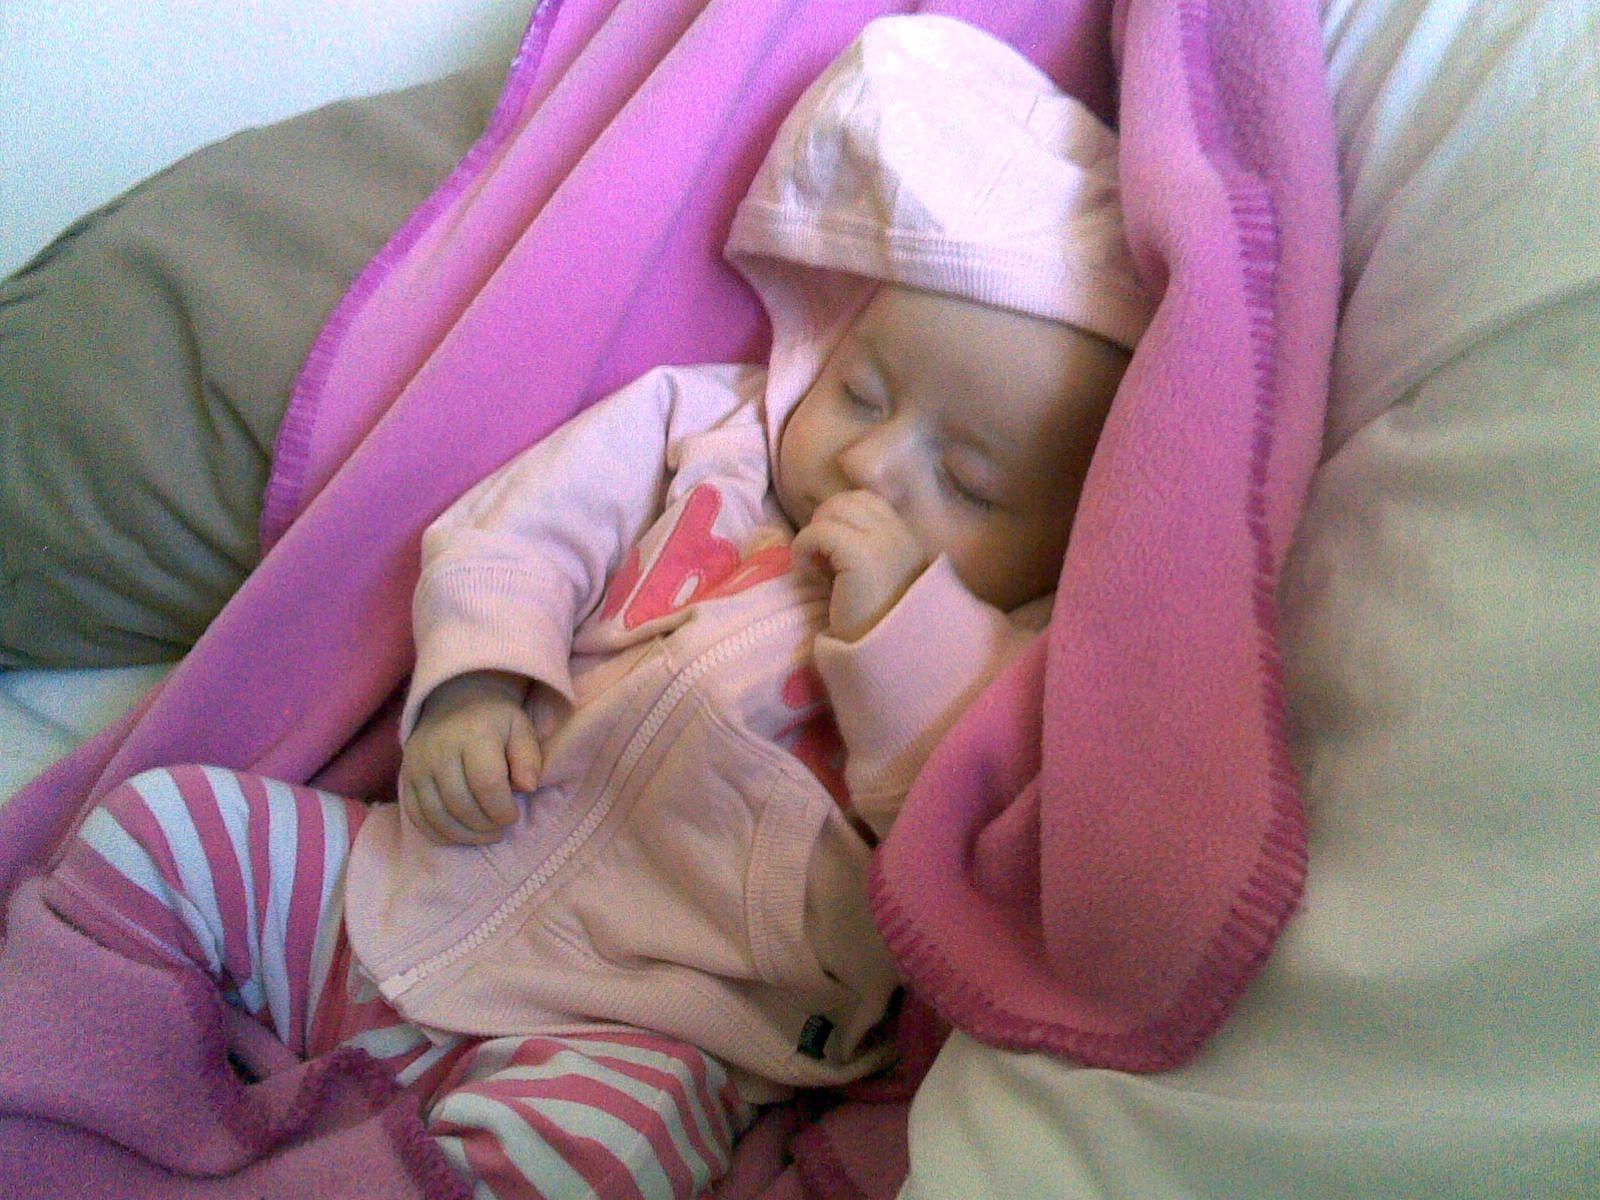 A photo of a small baby lying on a pink blanket with pink and white stripy pants on, and a pink hoodie. She's asleep and has her thumb in her mouth.